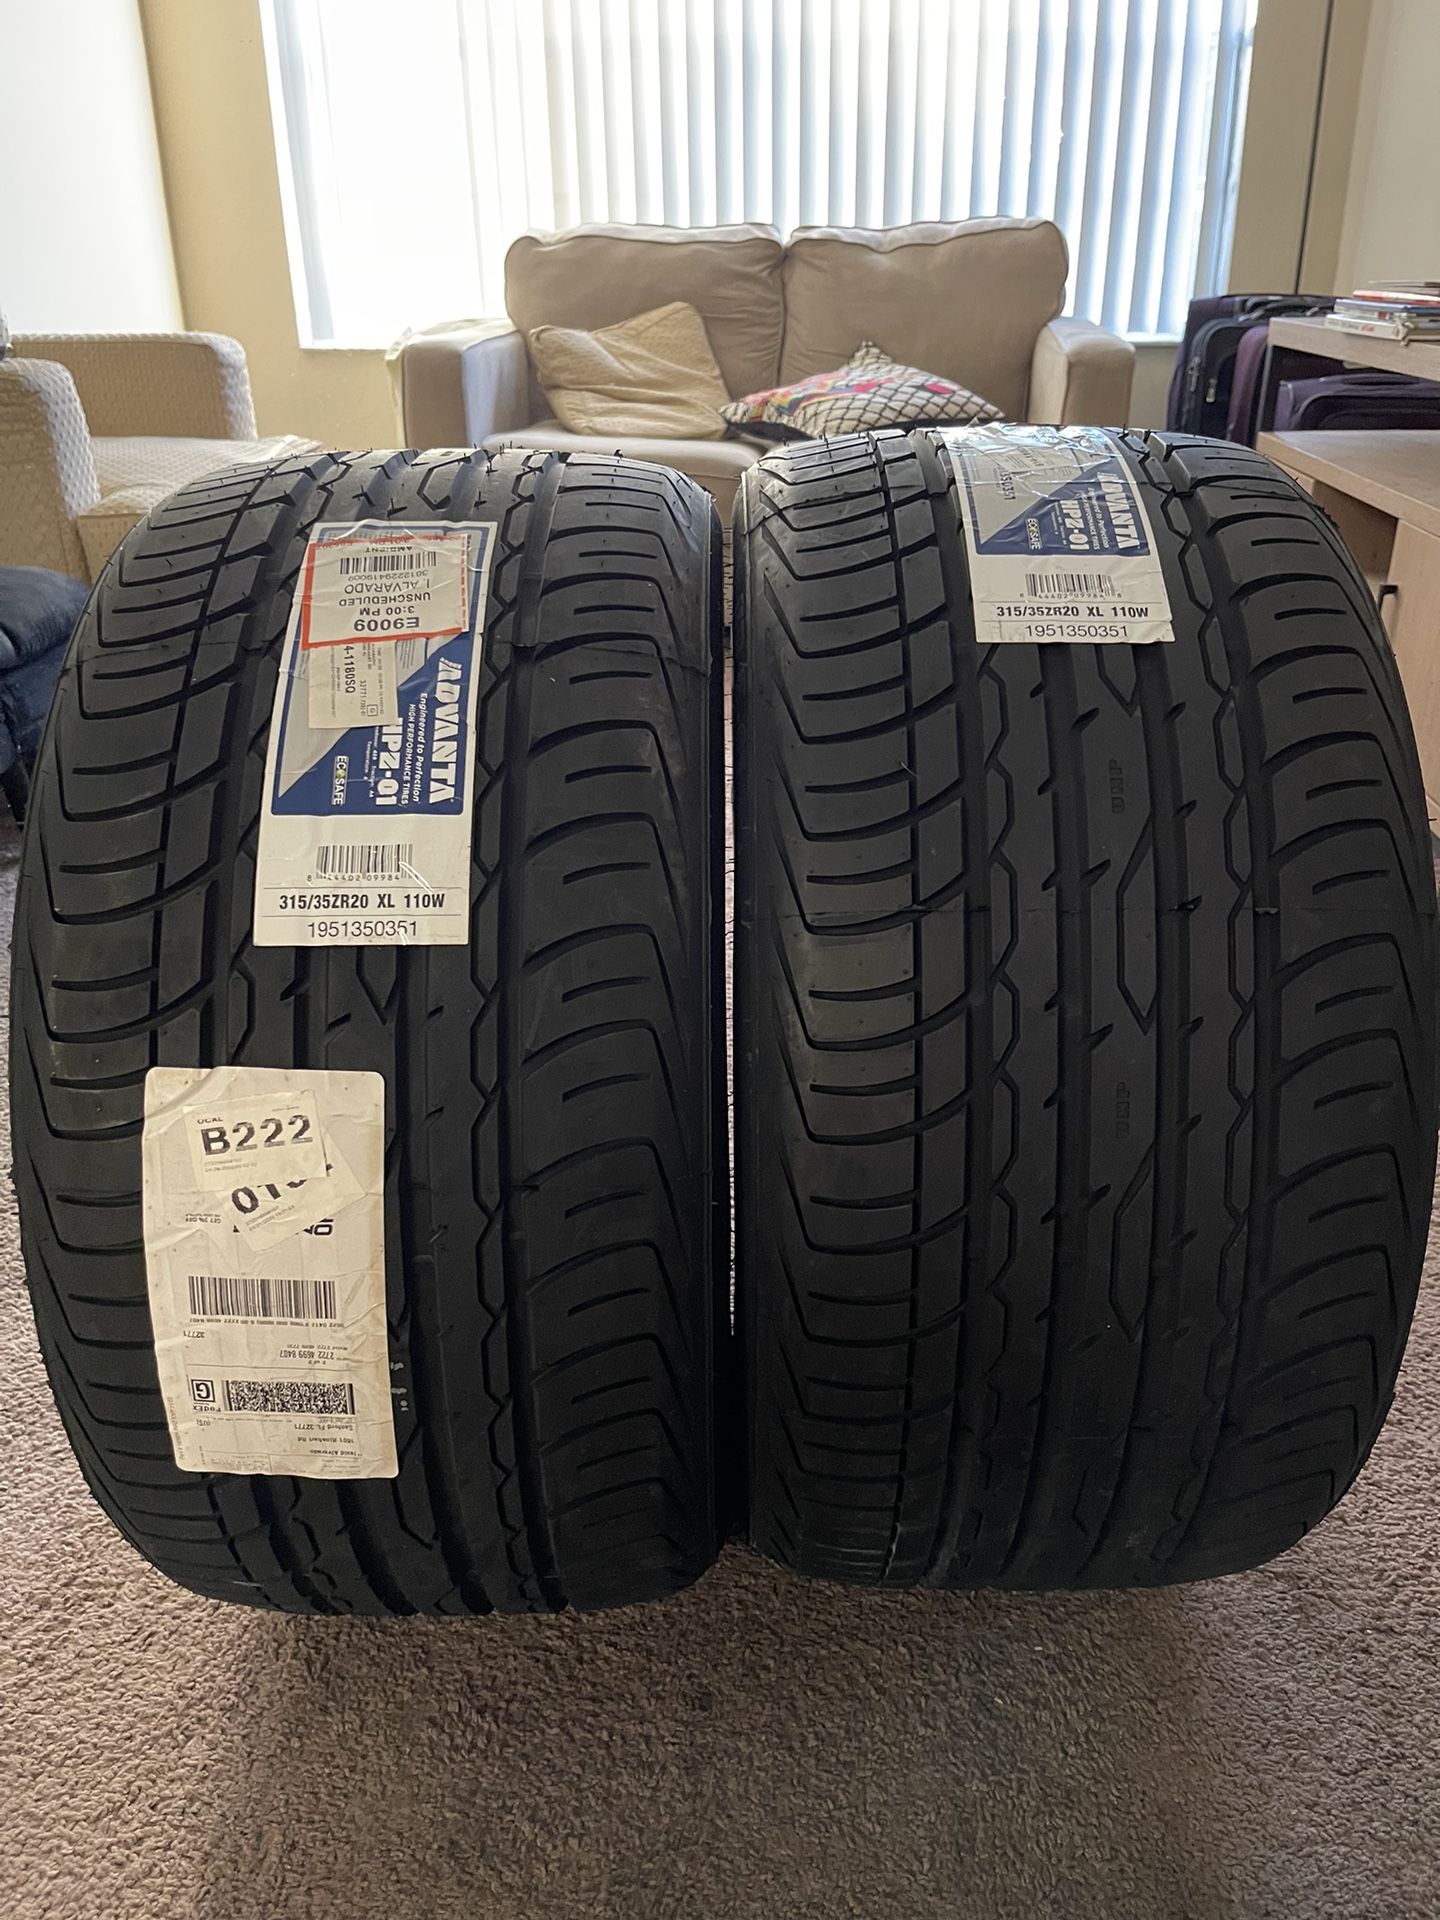 New Tires 315/35/20